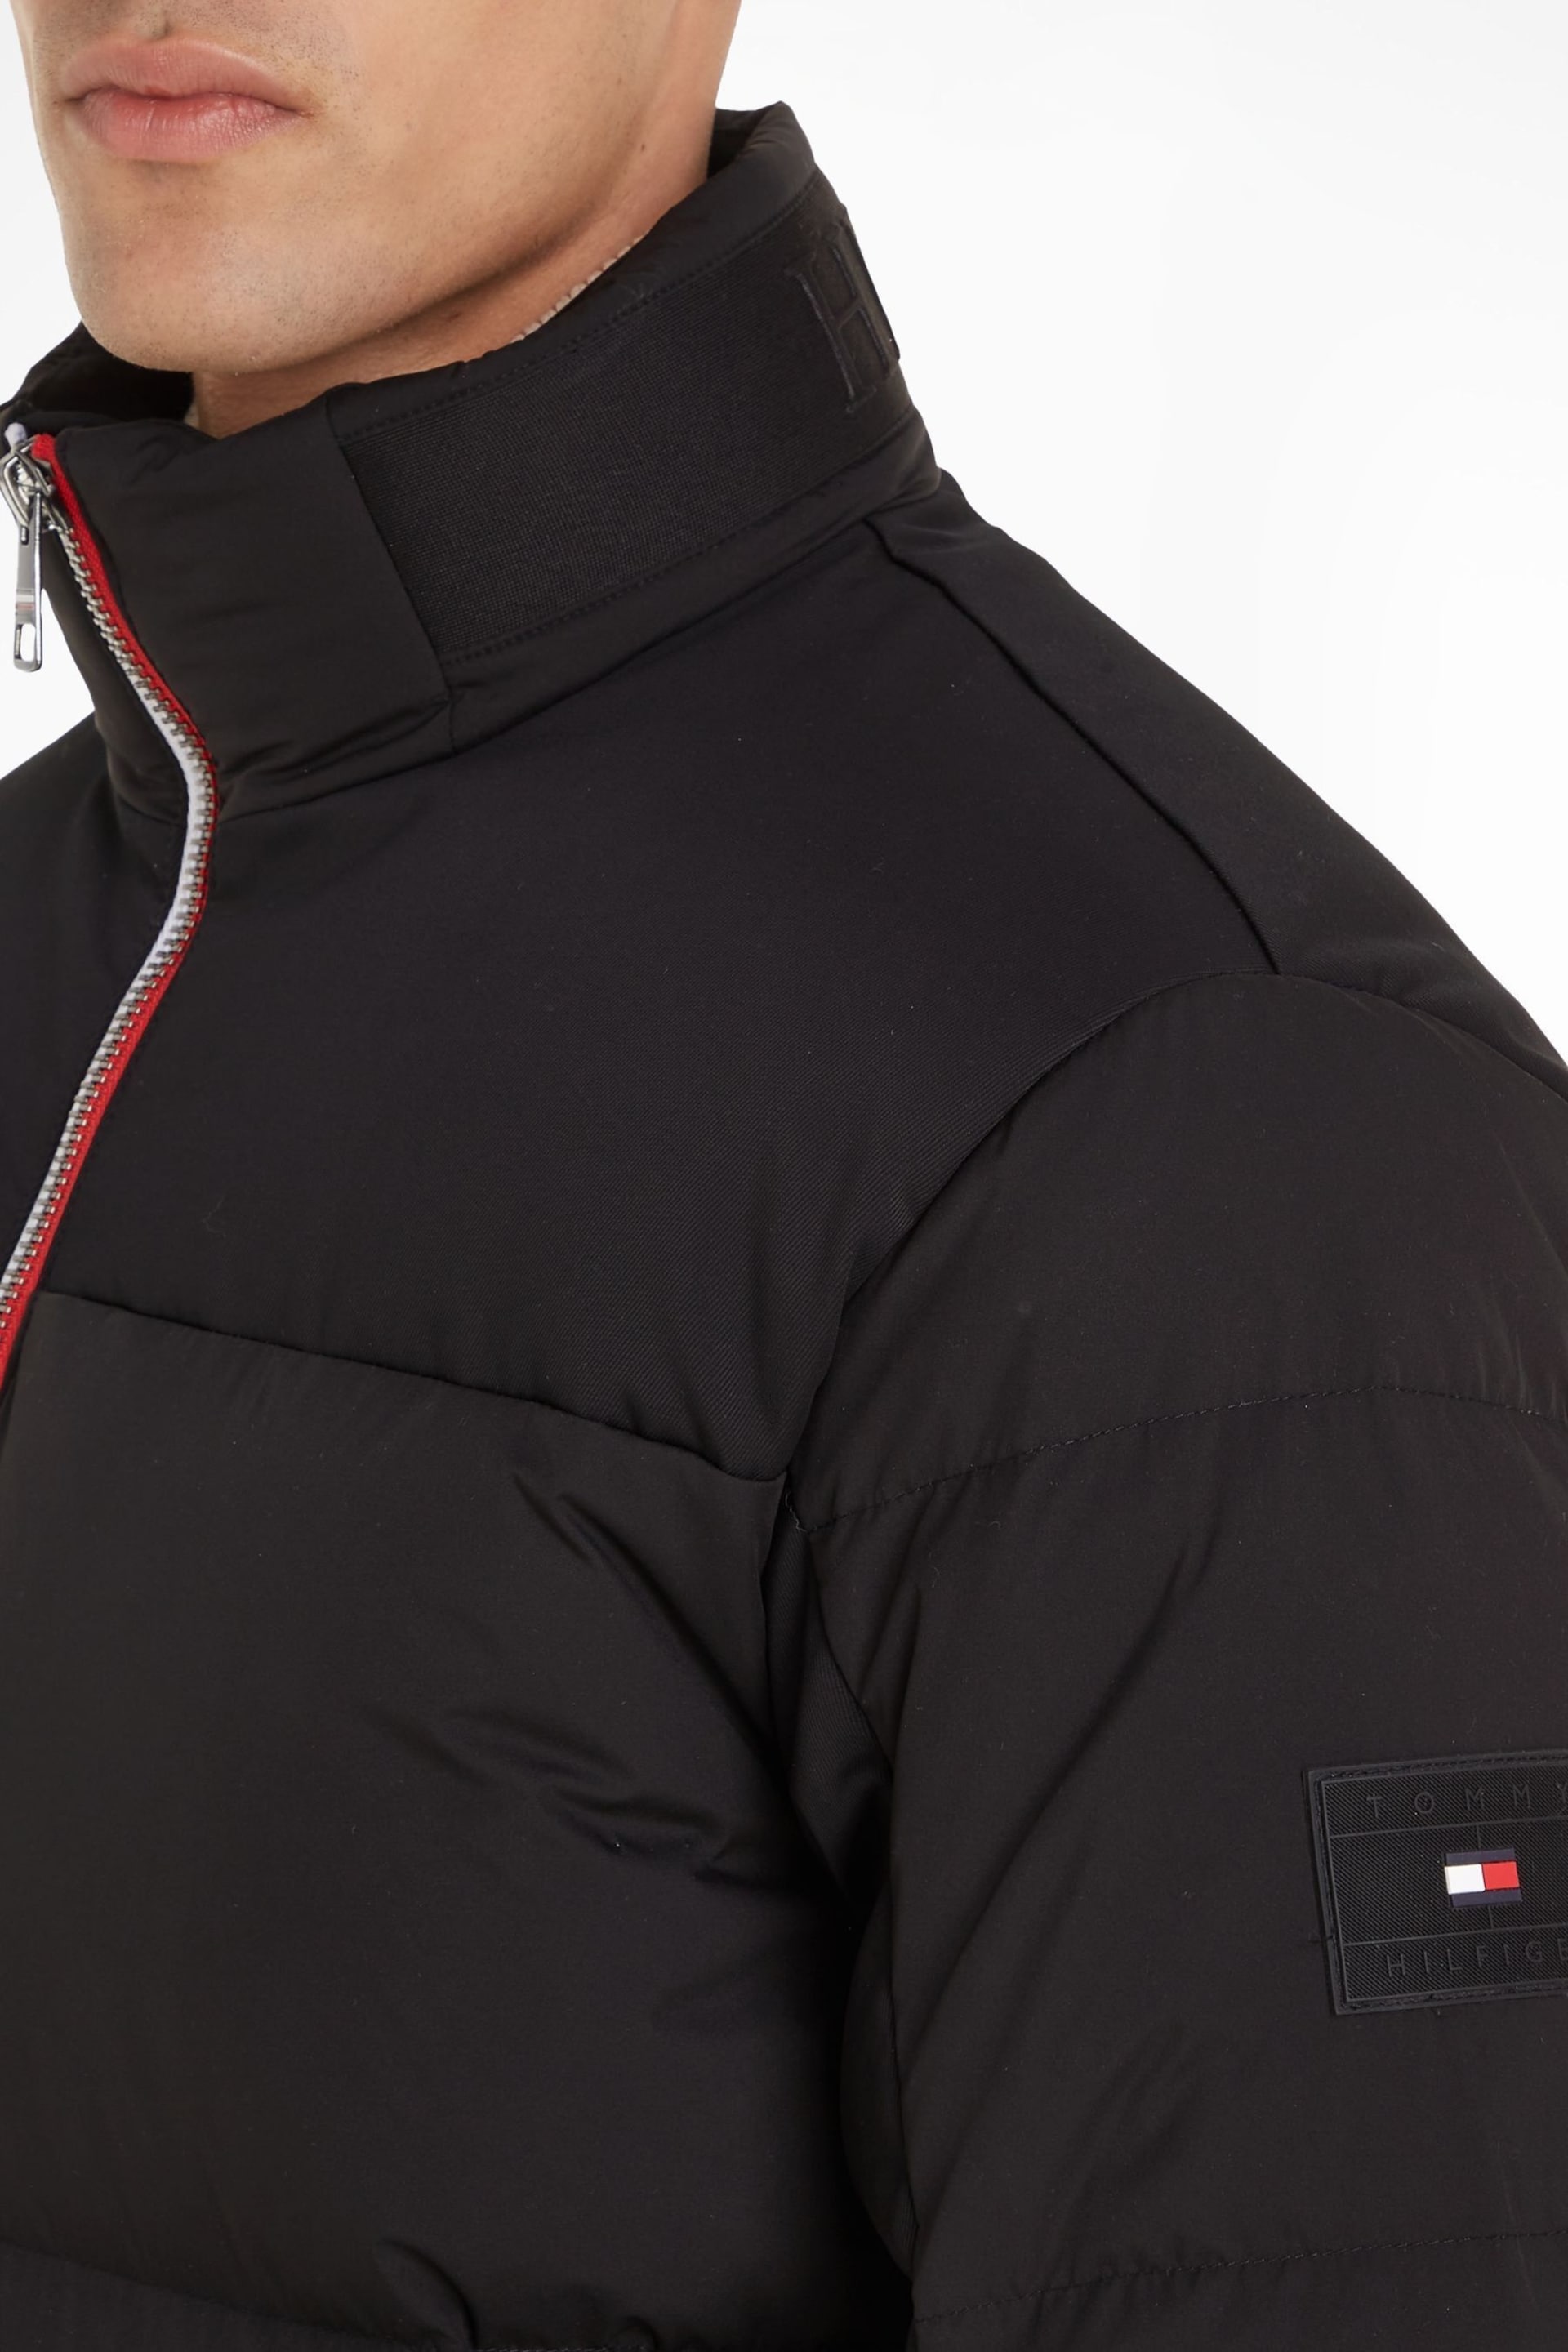 Tommy Hilfiger New York Down Puffer Black Jacket - Image 3 of 4